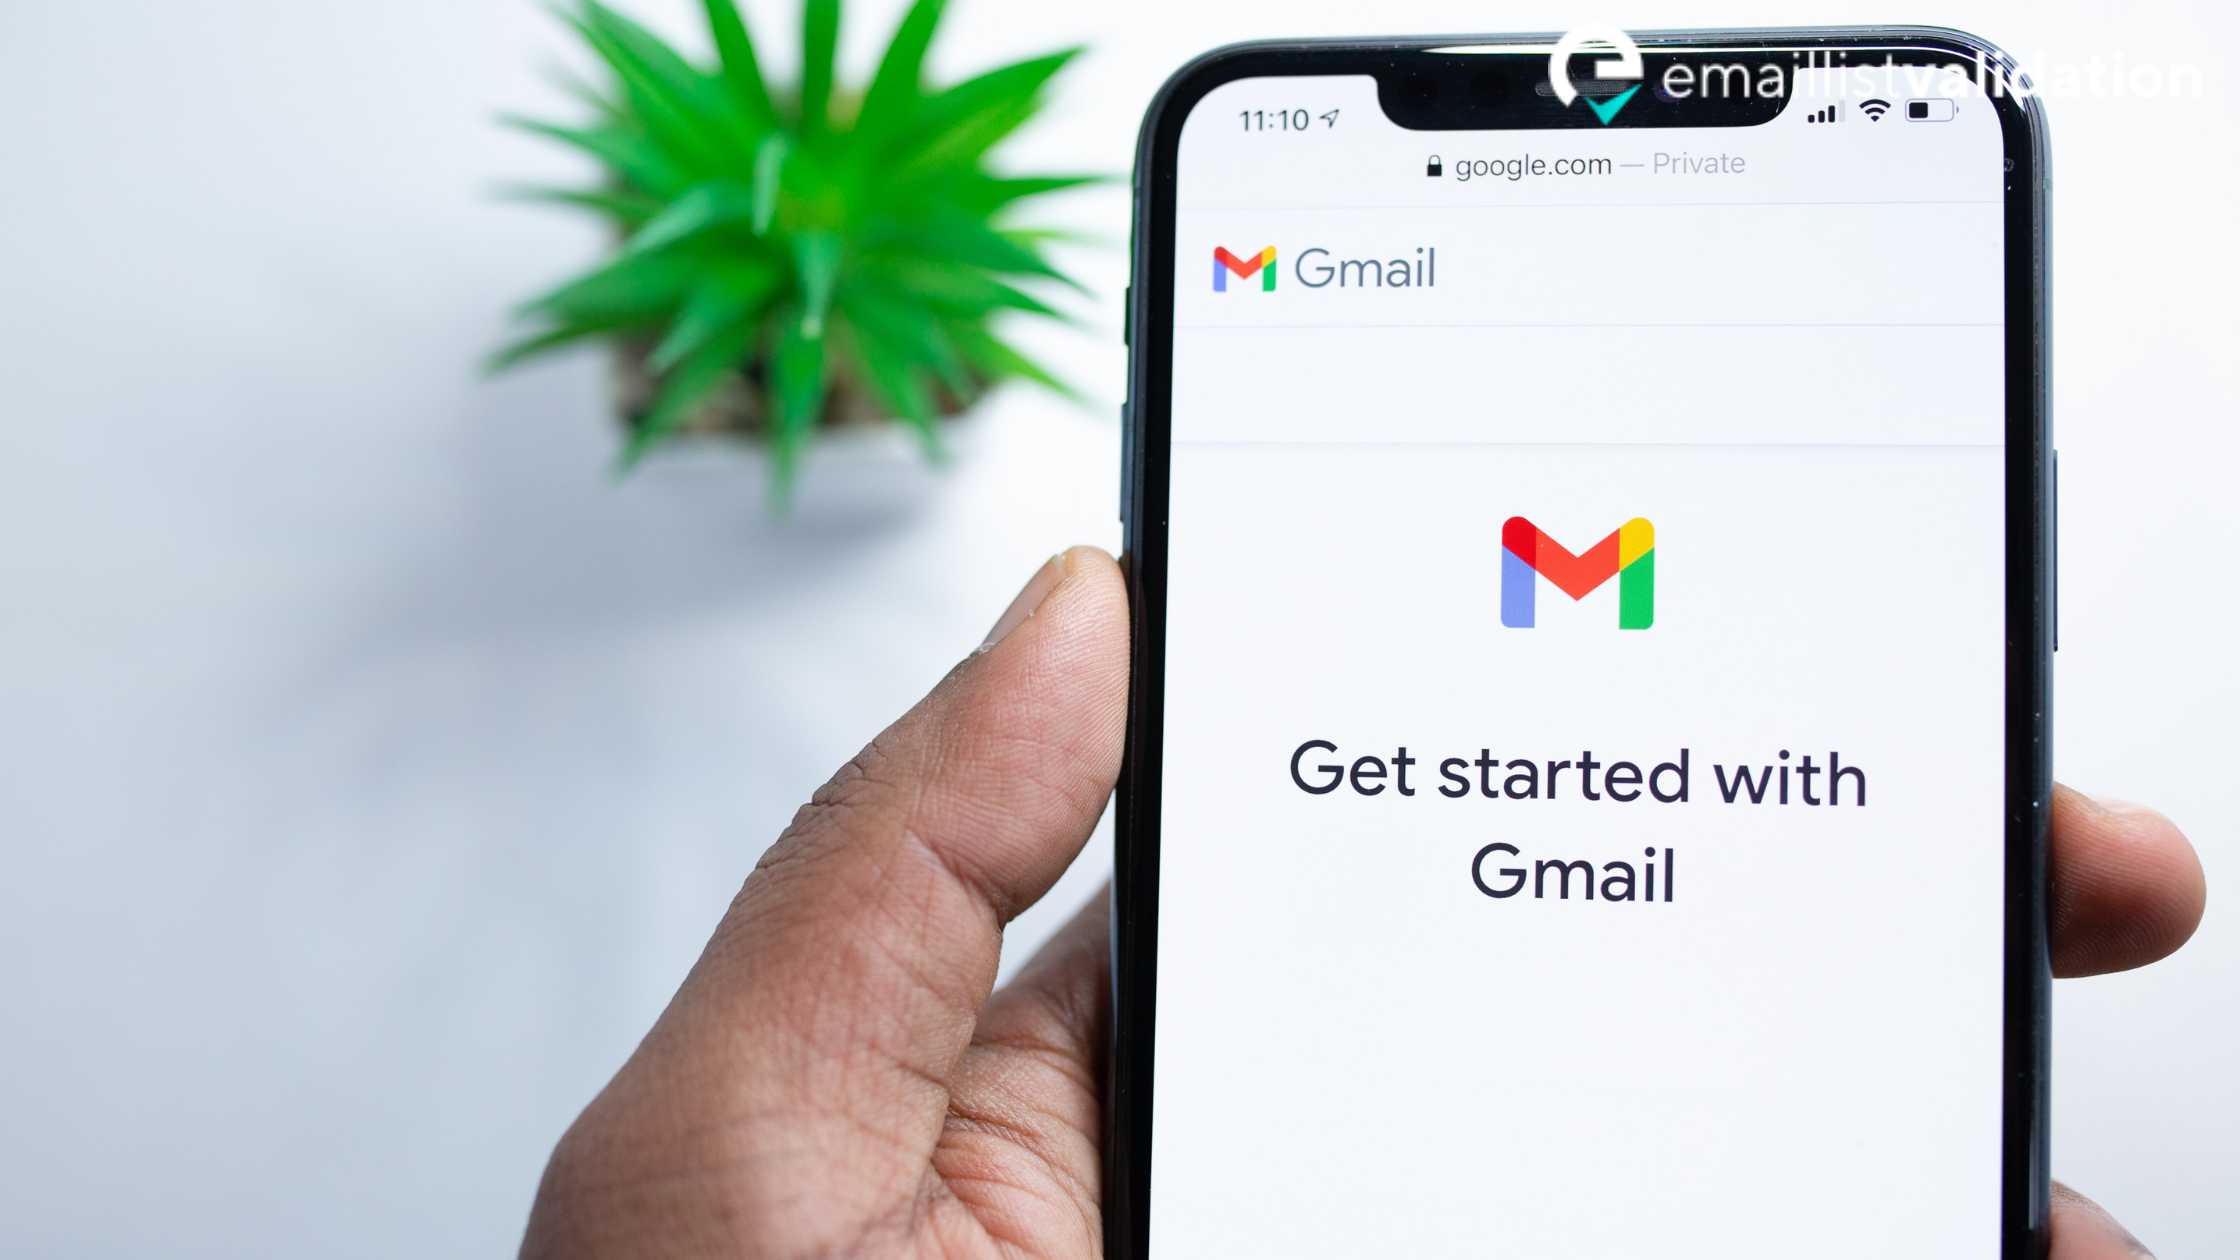 "Get started with Gmail" on a phone screen